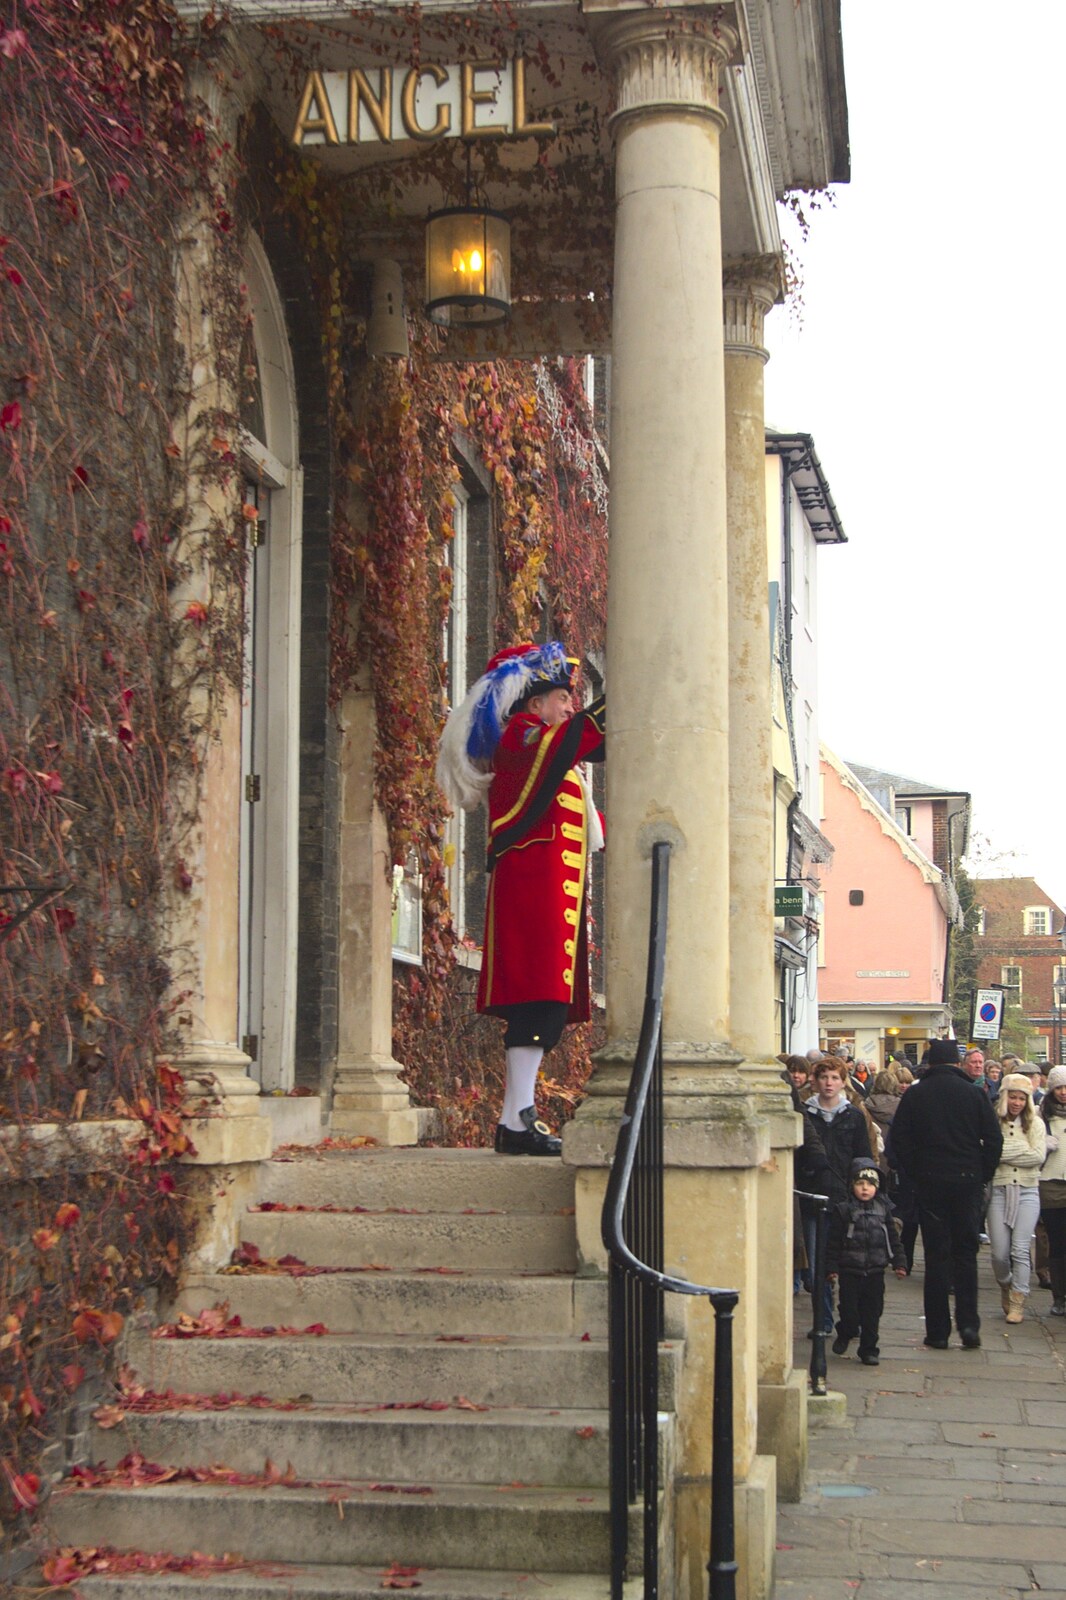 A Christmas Fair, Bury St. Edmunds, Suffolk - 28th November 2010: A Town Cryer finishes his speech on the Angel steps